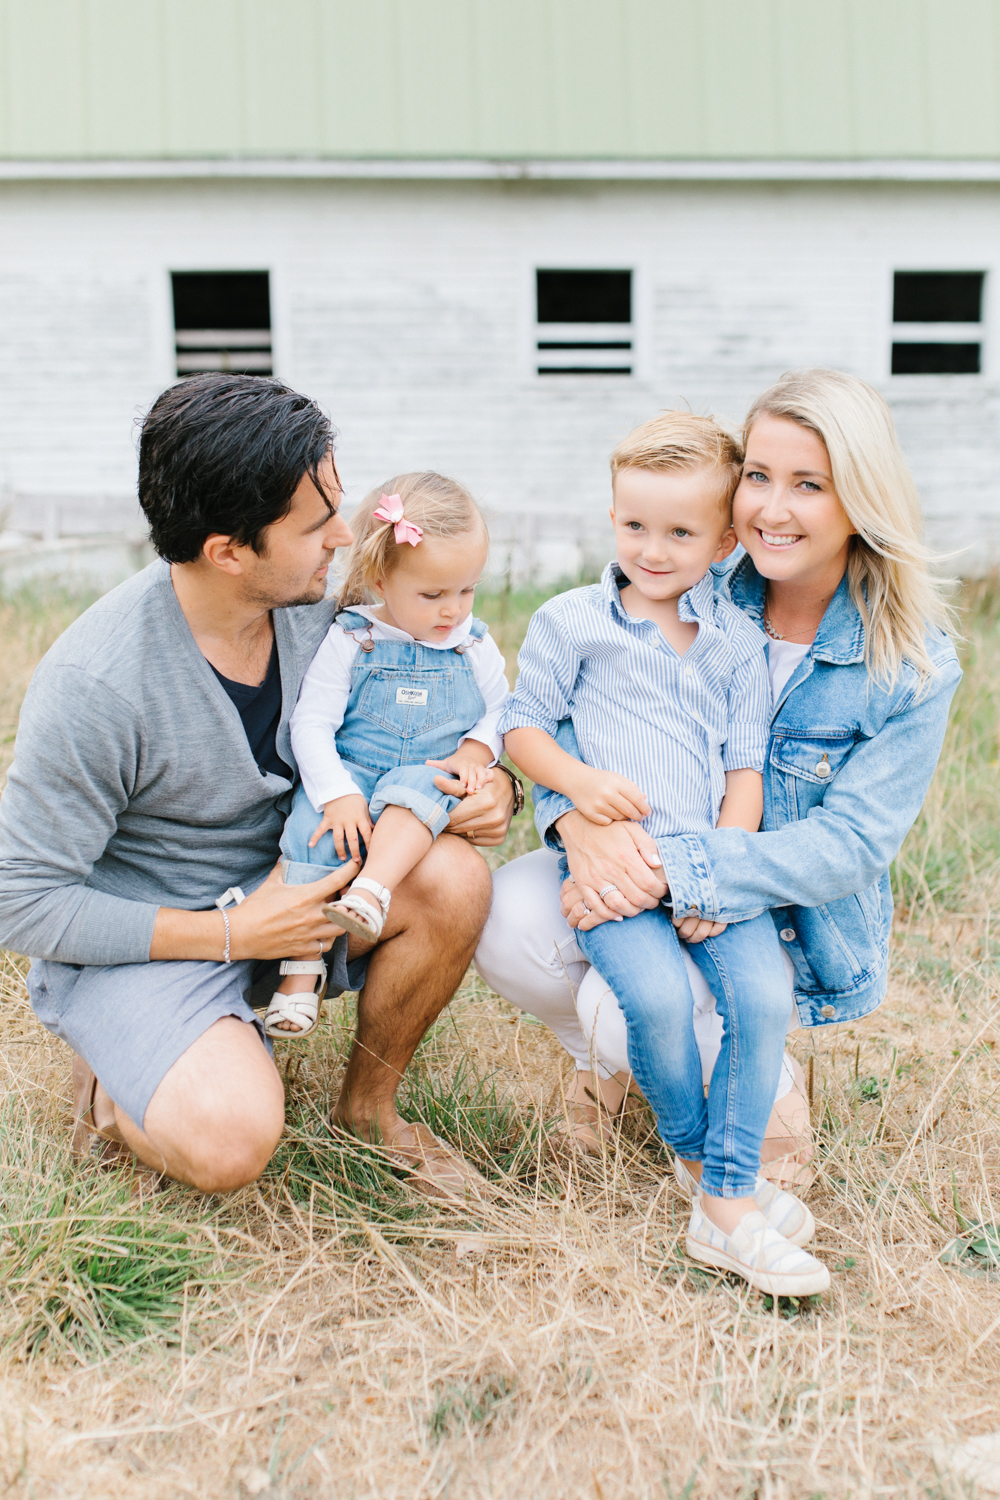 Rose Ranch Family Photo Session | Monika Hibbs Family Session in South Bend, Washington | What to Wear for Family Pictures | Pacific Northwest Family Session with Emma Rose Company-19.jpg